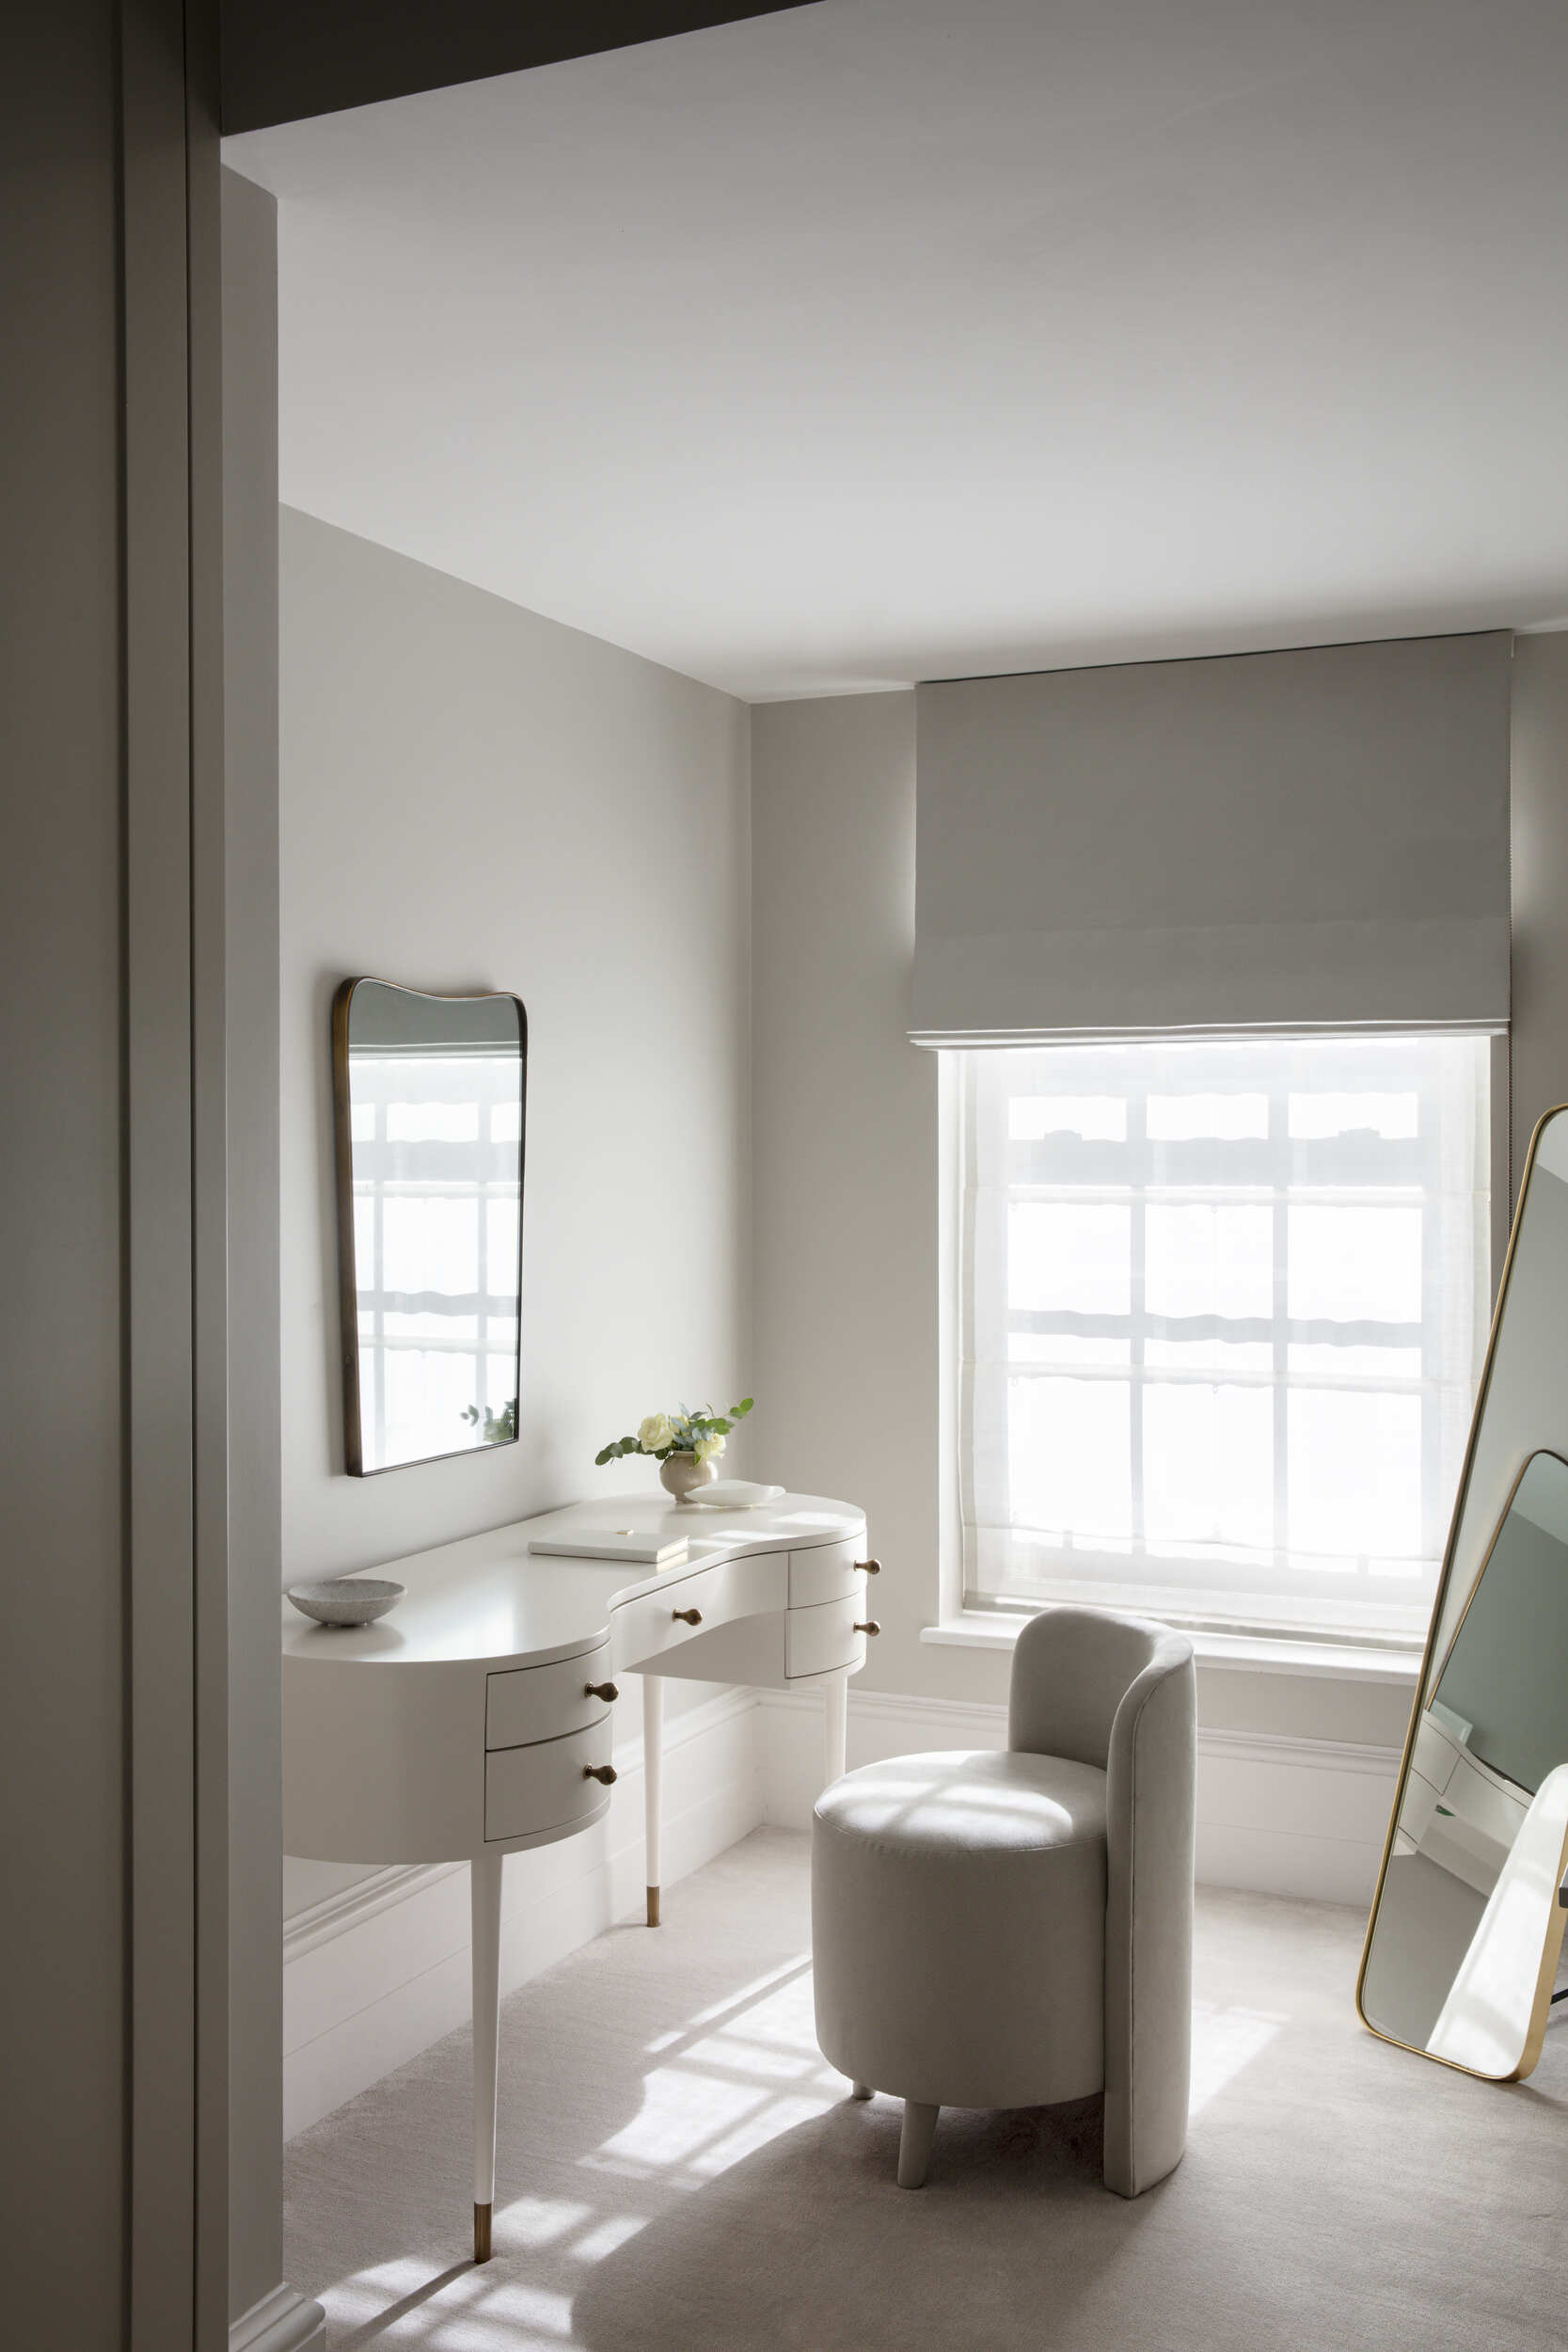 Dressing room with wall mounted mirror and freestanding